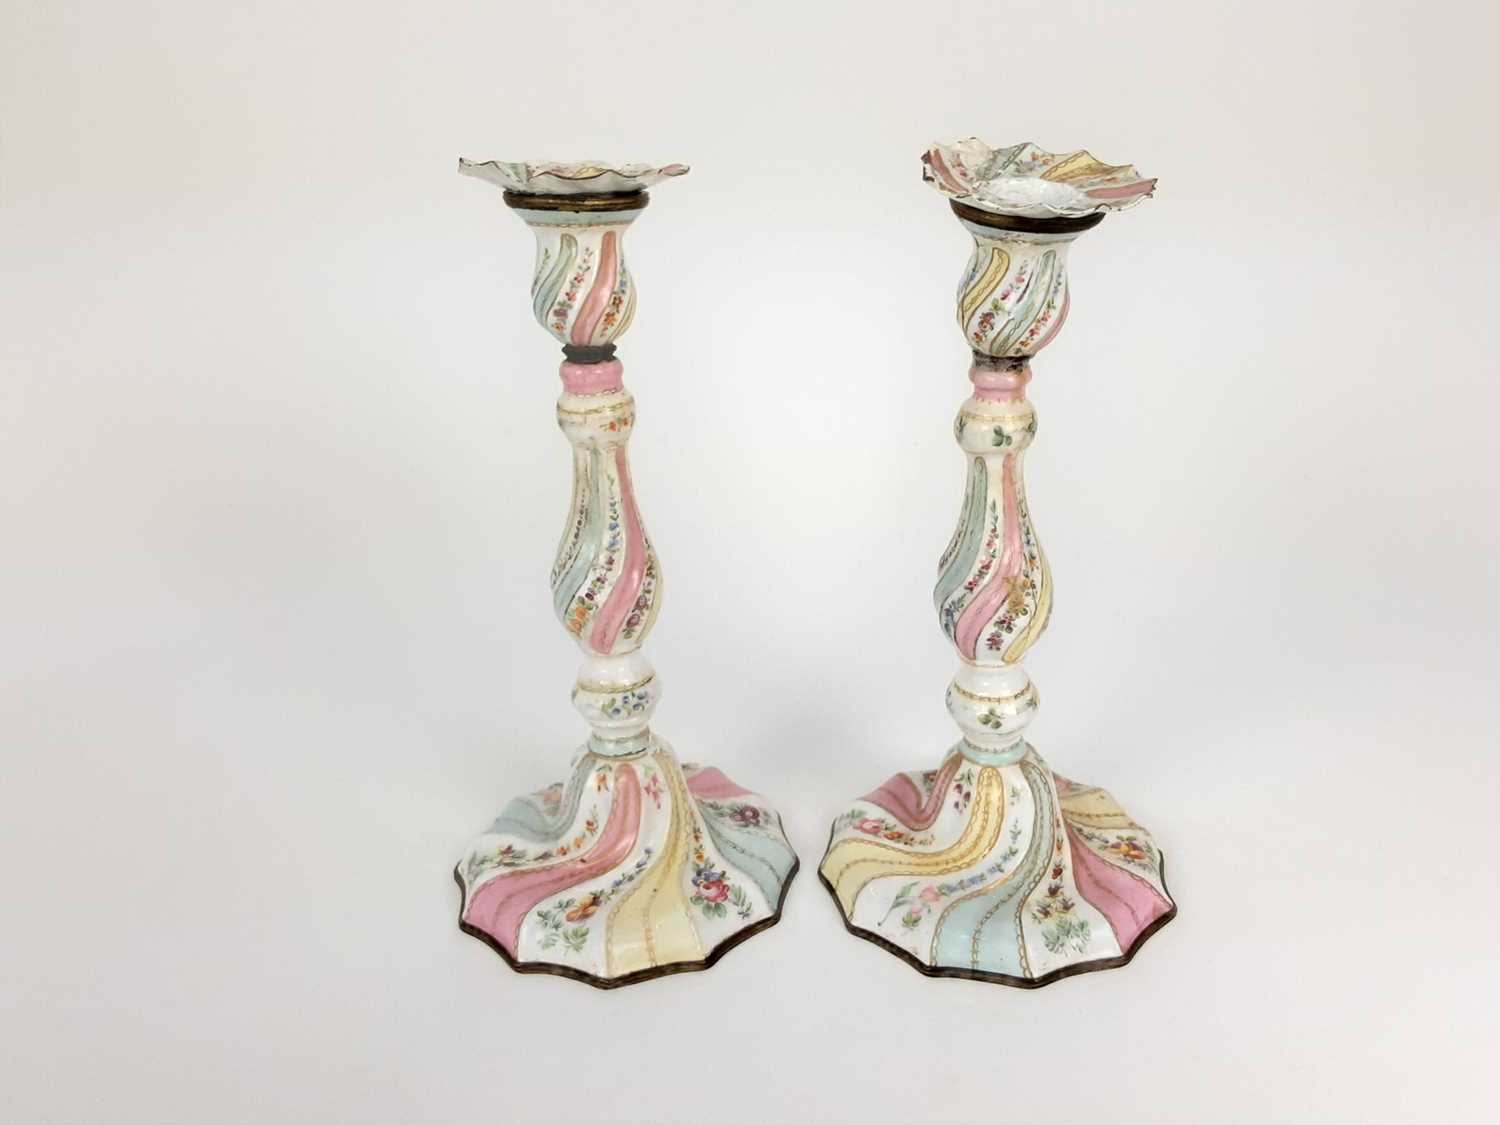 Pair of 18th century enamelled candlesticks, possibly Bilston, with spiralling knopped stems, painte